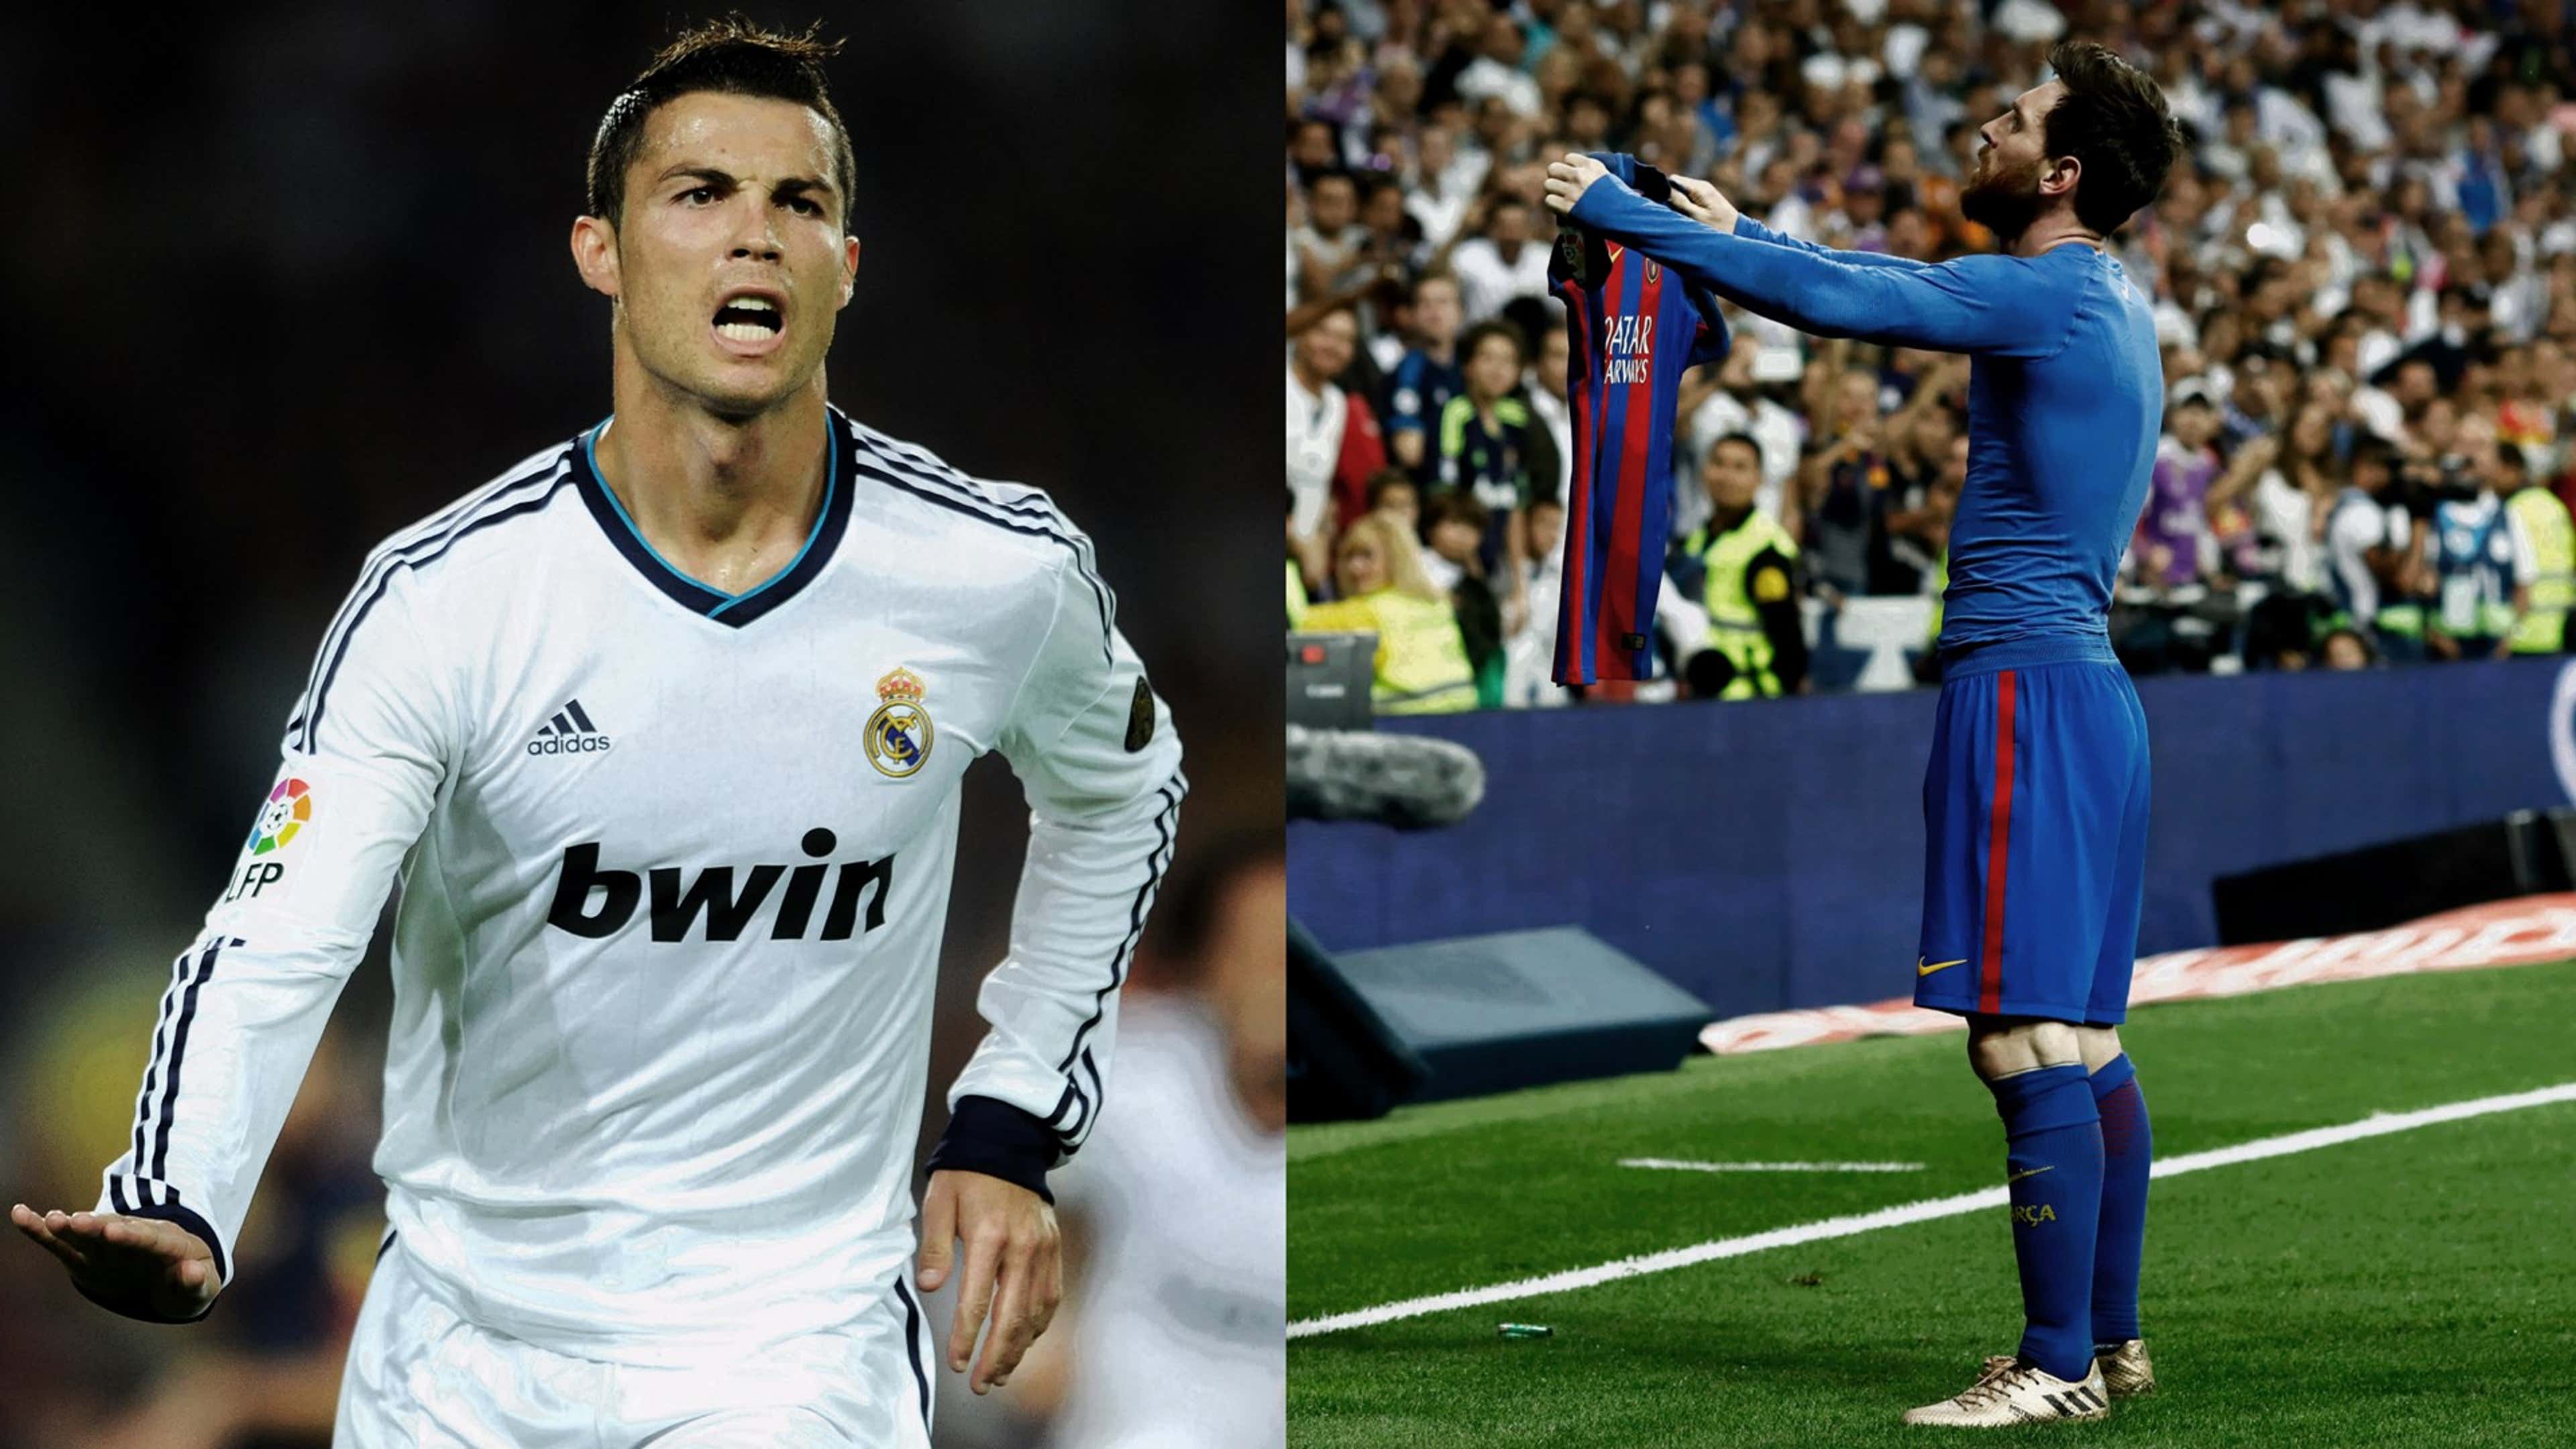 Watch: What would it be like if Messi, Ronaldo played together? This  brilliant video shows just